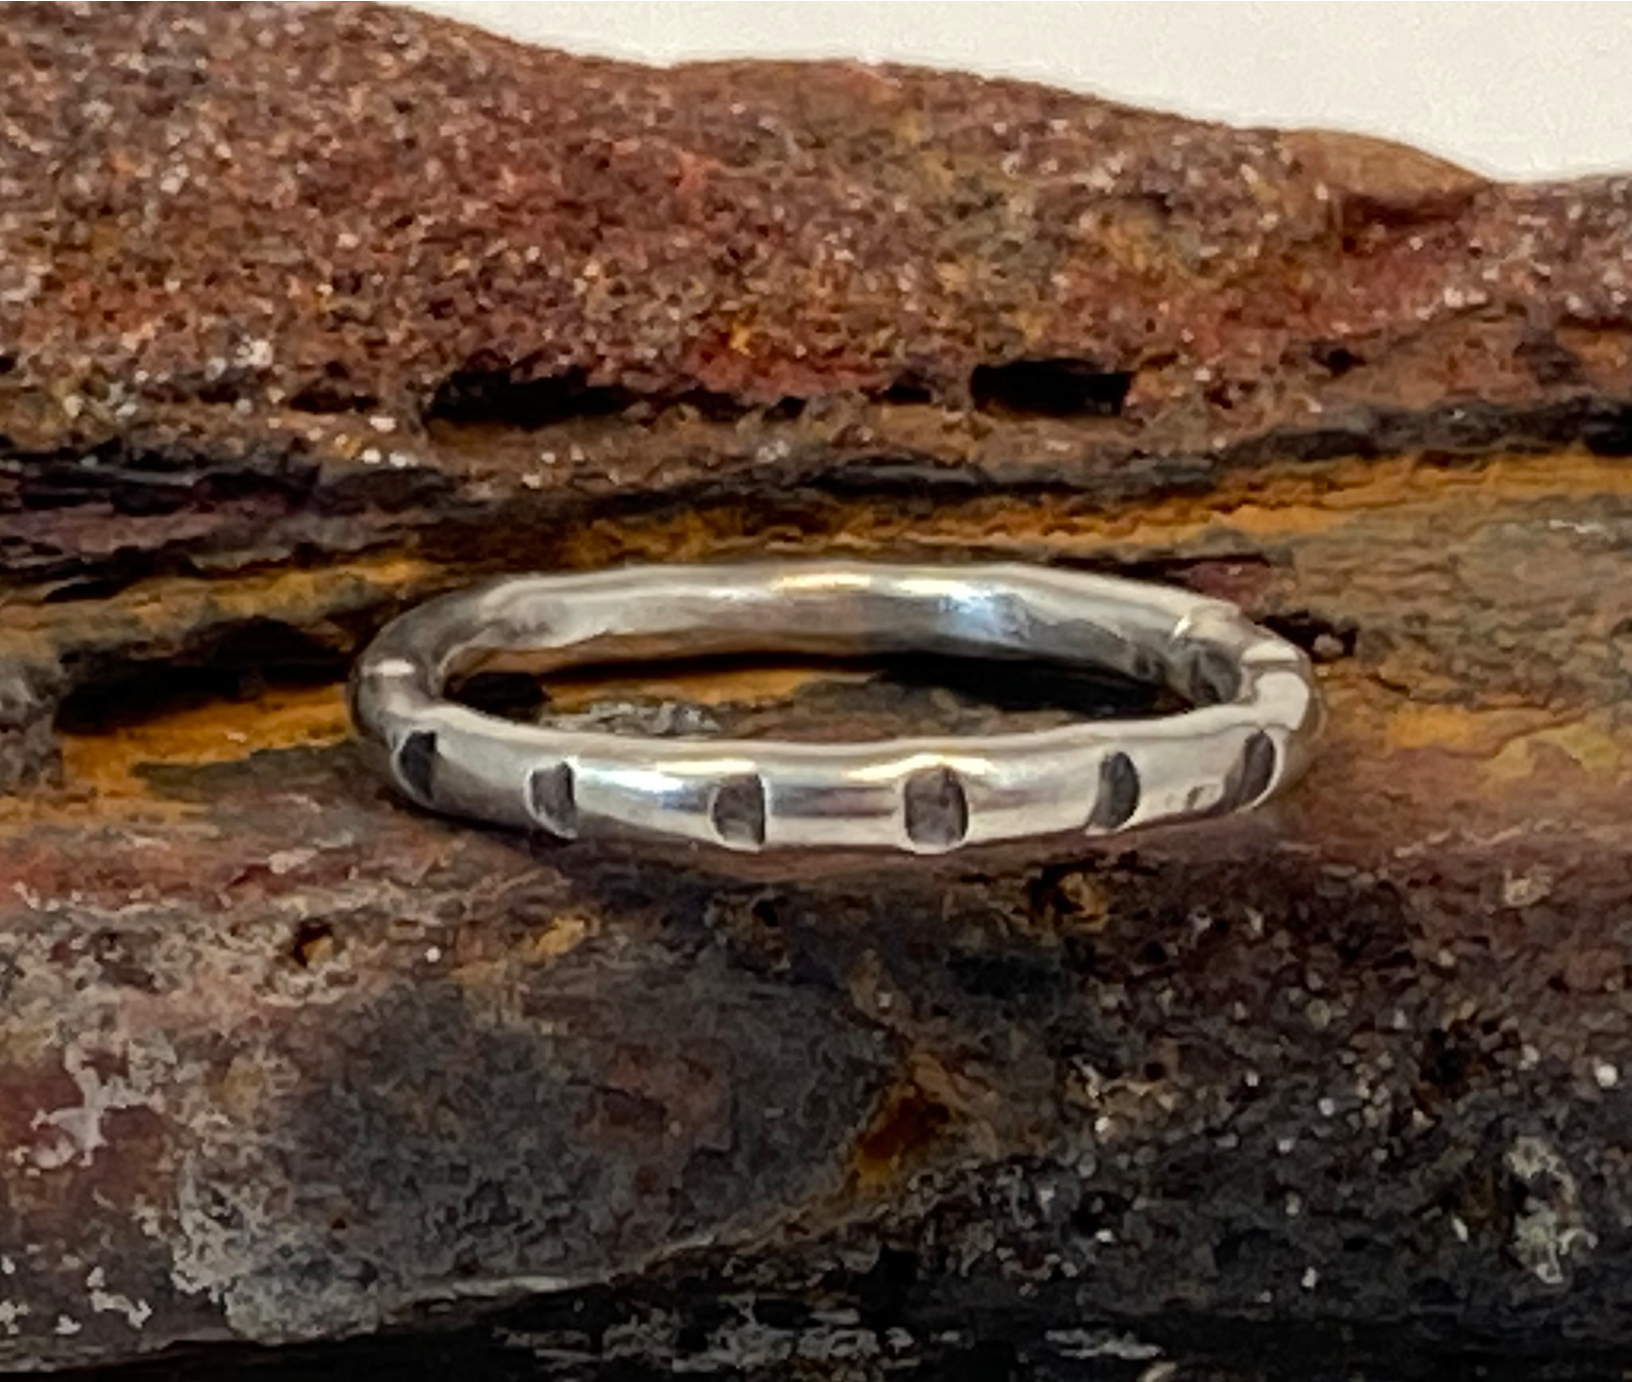 One-of-a-kind hand-crafted ring.  Round sterling silver band. Band is adorned with lined stamp pattern. Women's size 4-1/2